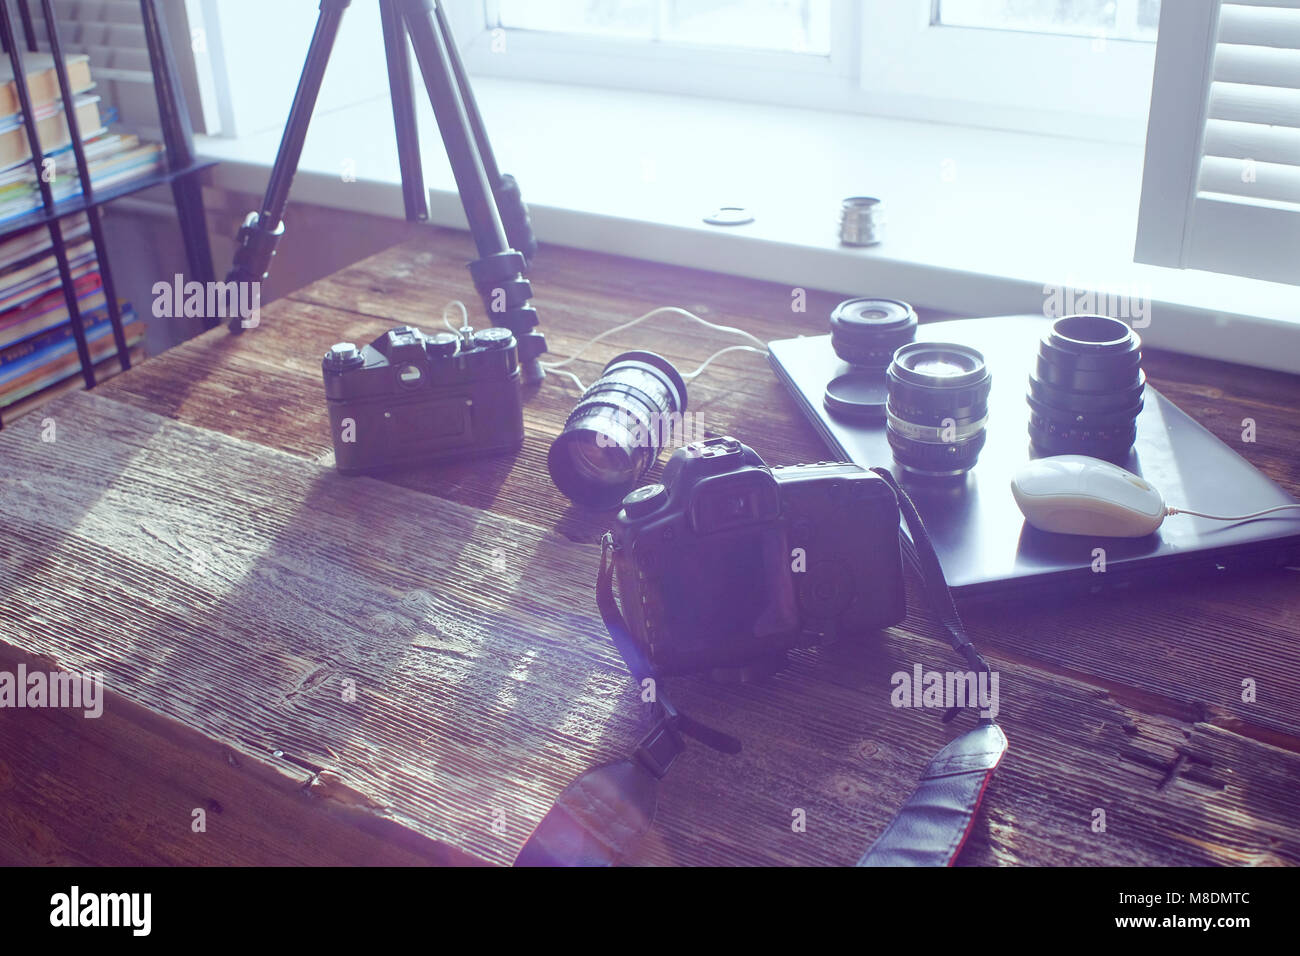 Still life of camera equipment and laptop on table in front of window Stock Photo